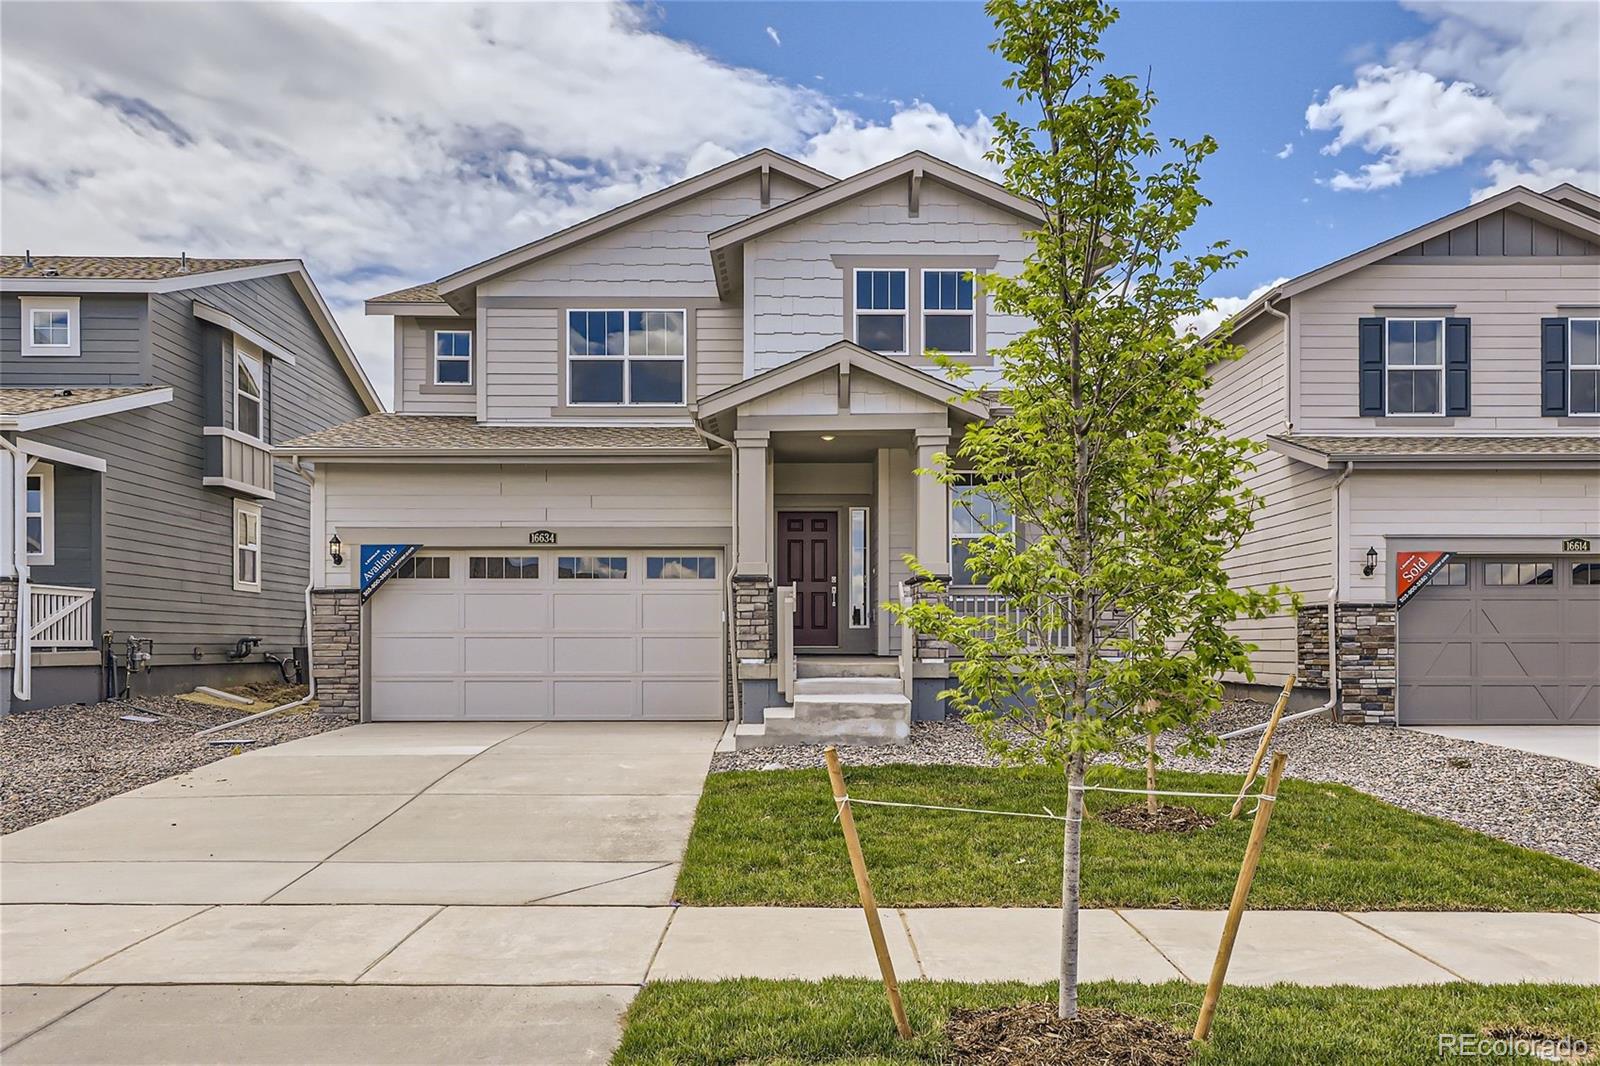 16634 E 109th Place, commerce city MLS: 7416287 Beds: 4 Baths: 3 Price: $609,900